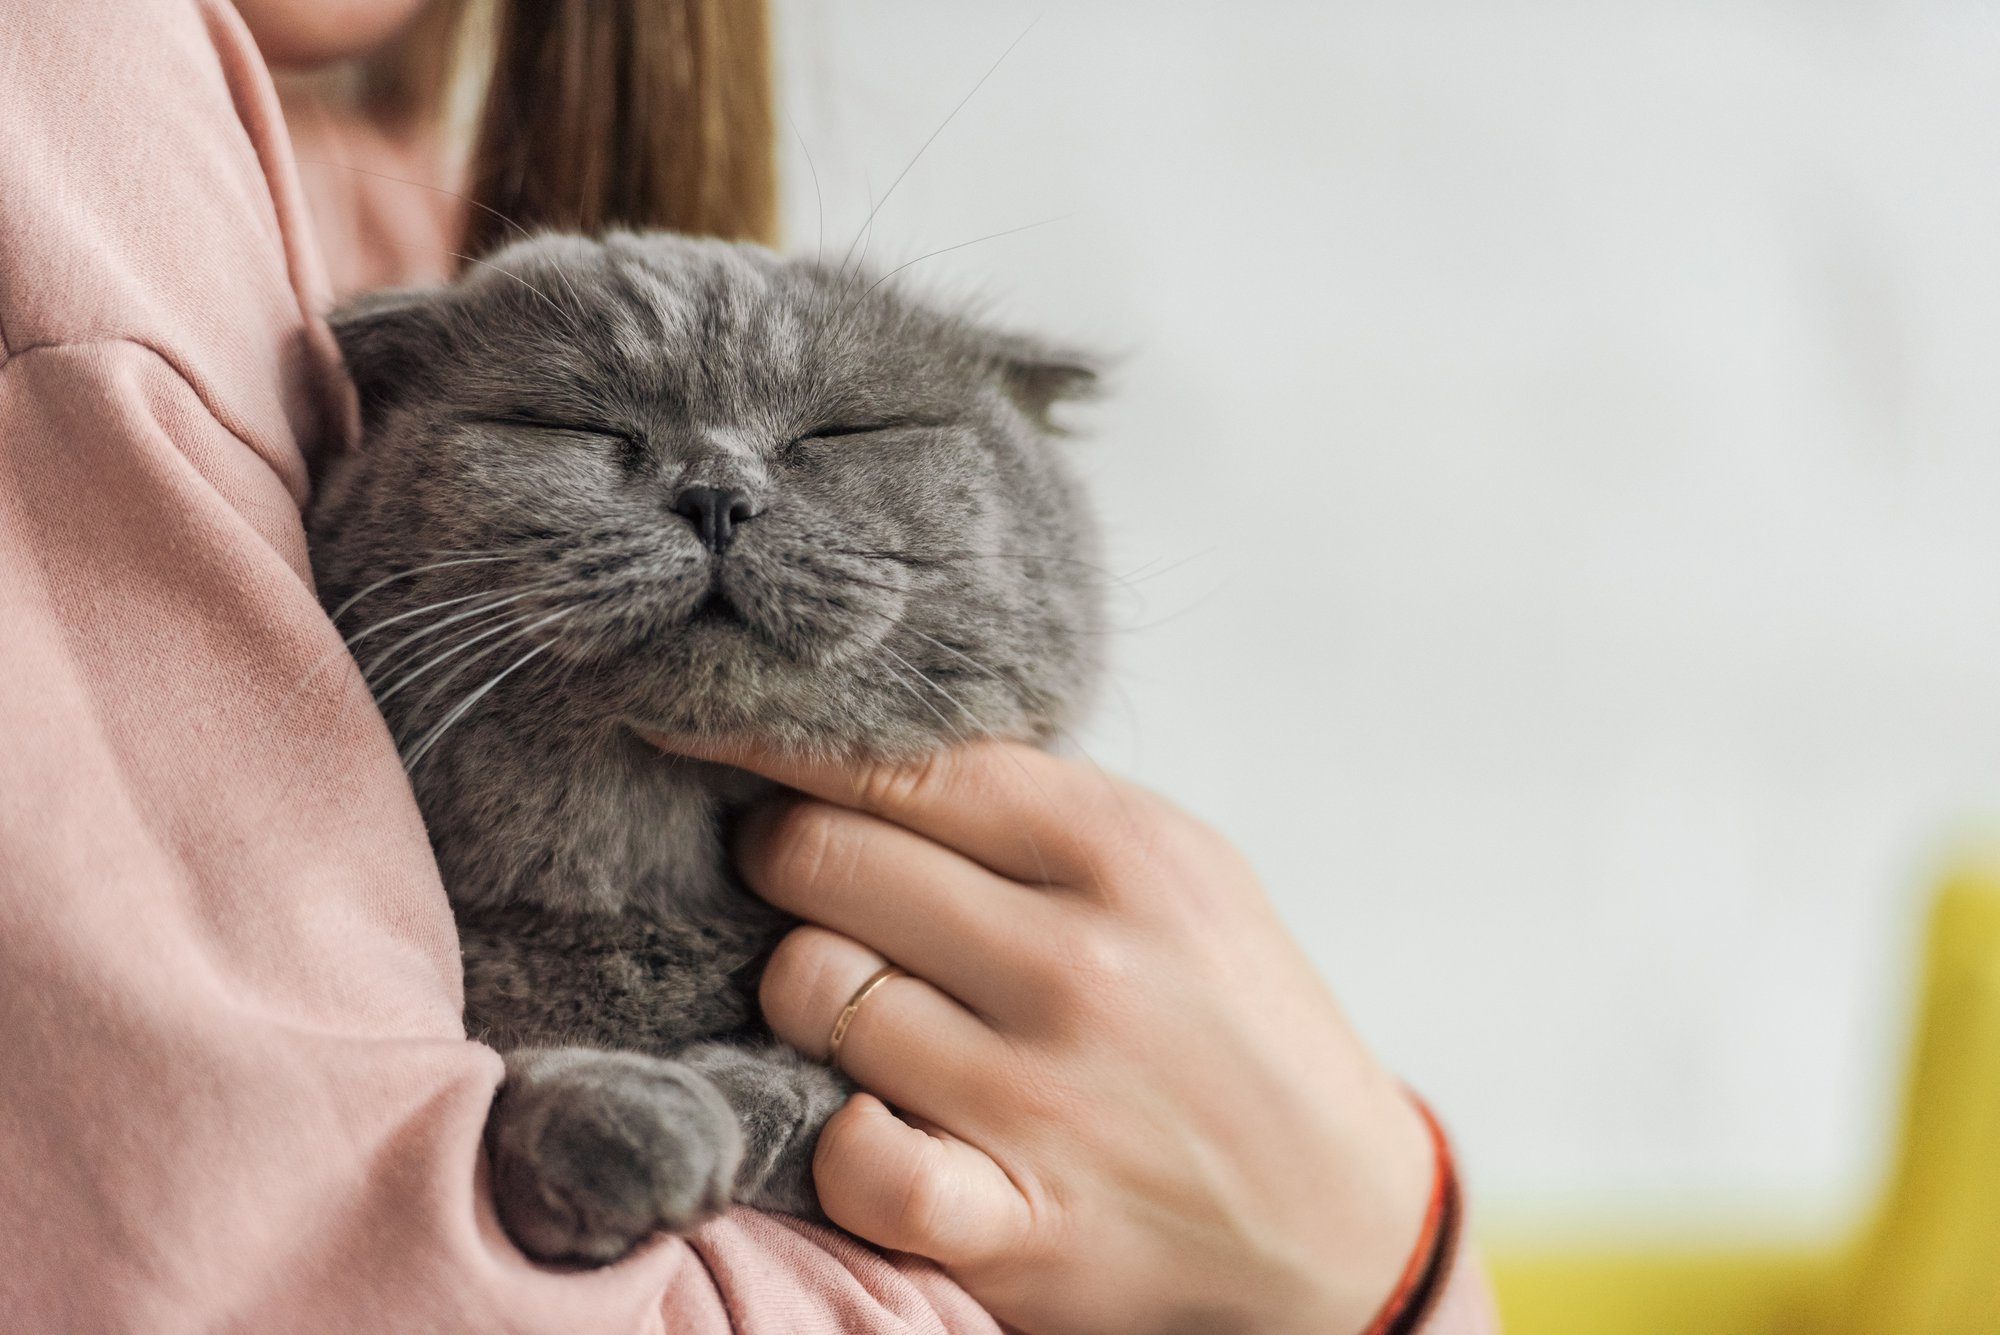 7 New Year Goals Your Cat Hopes You Adopt in 2020